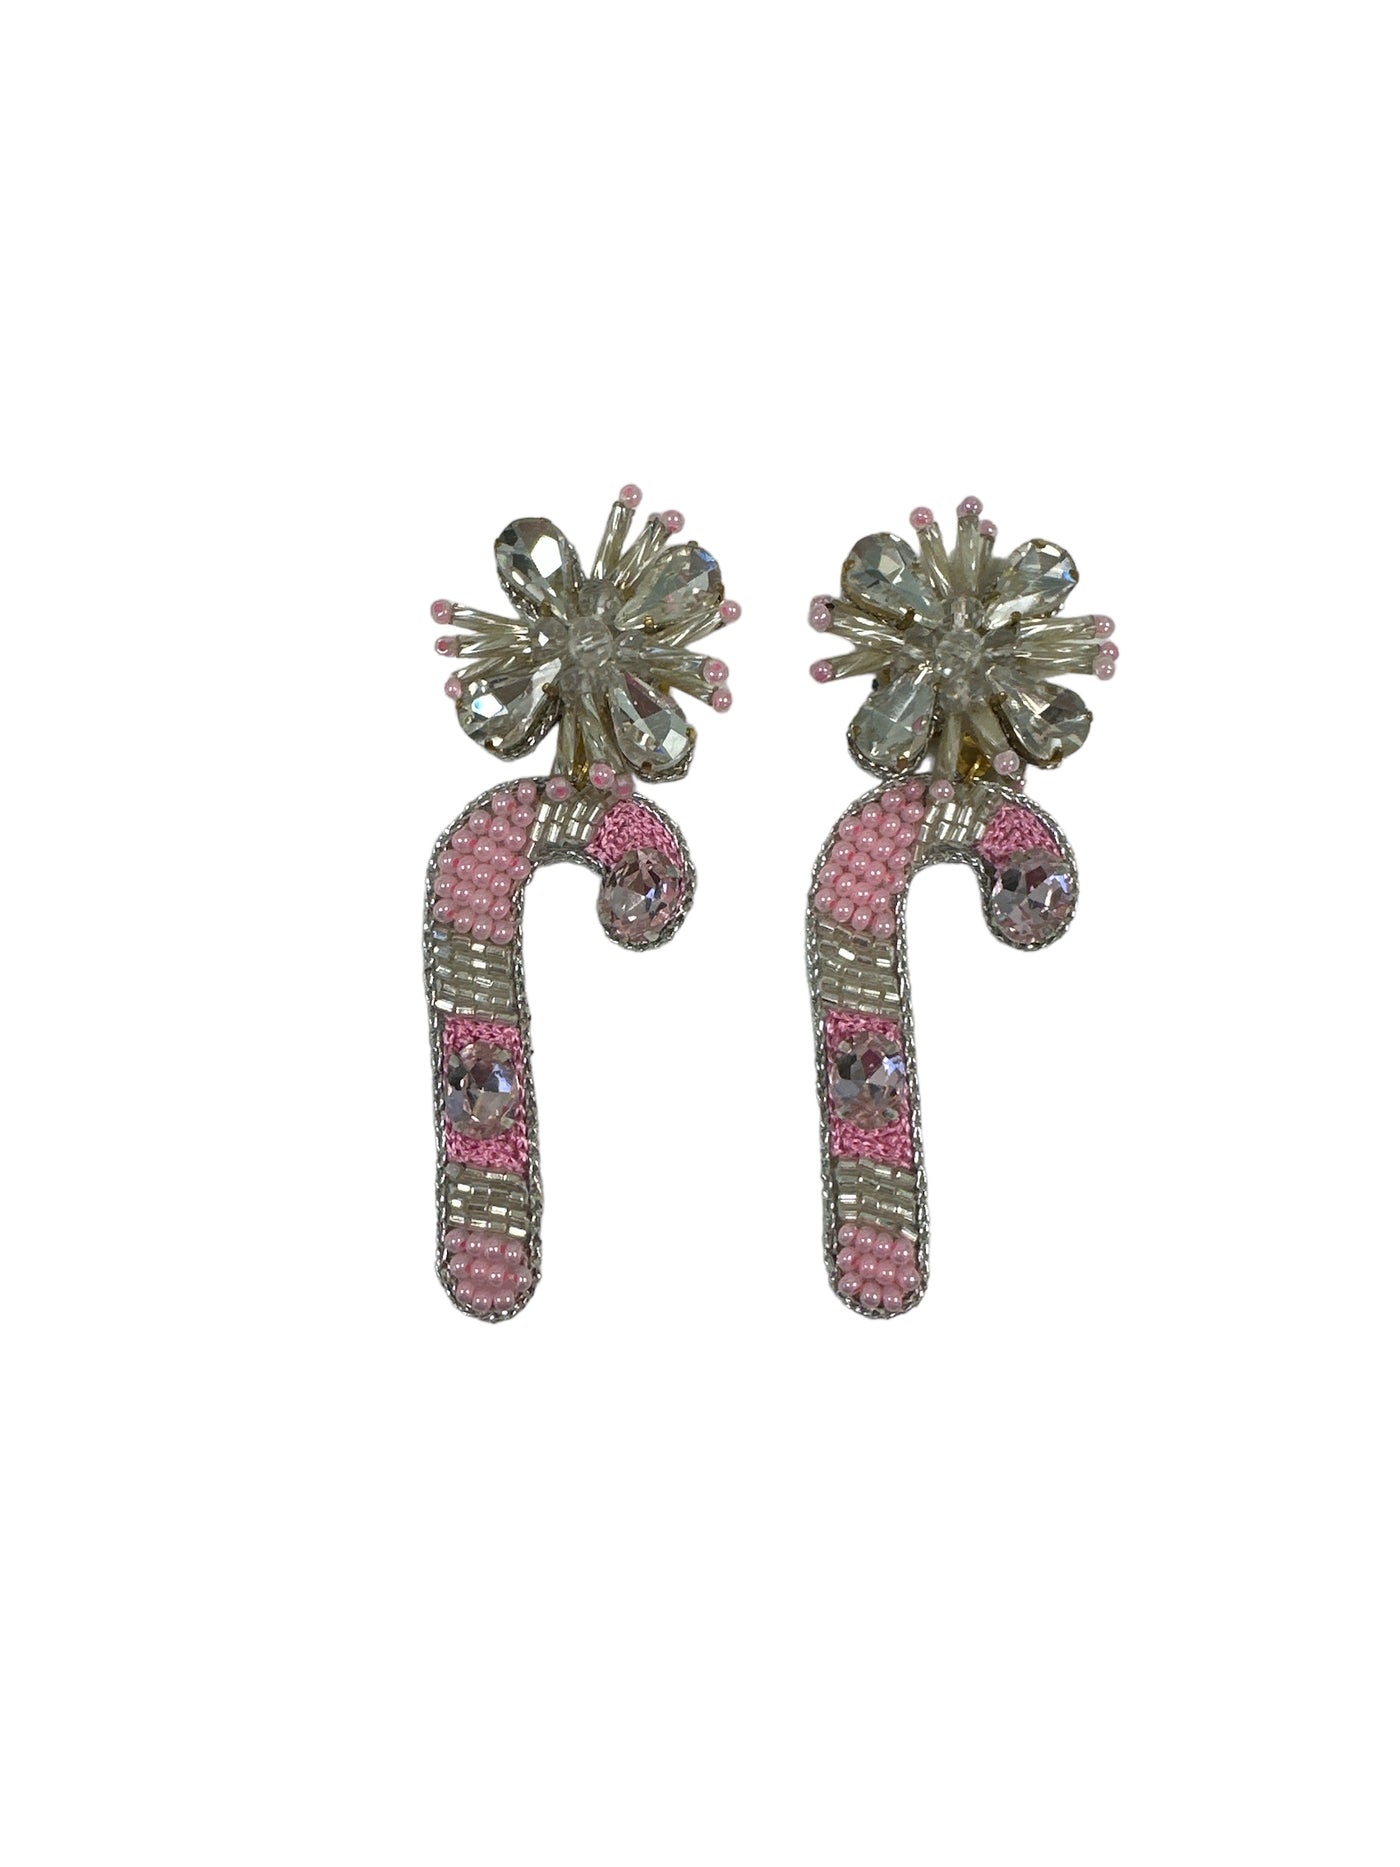 Sparkle Candy Cane Earrings - Pink